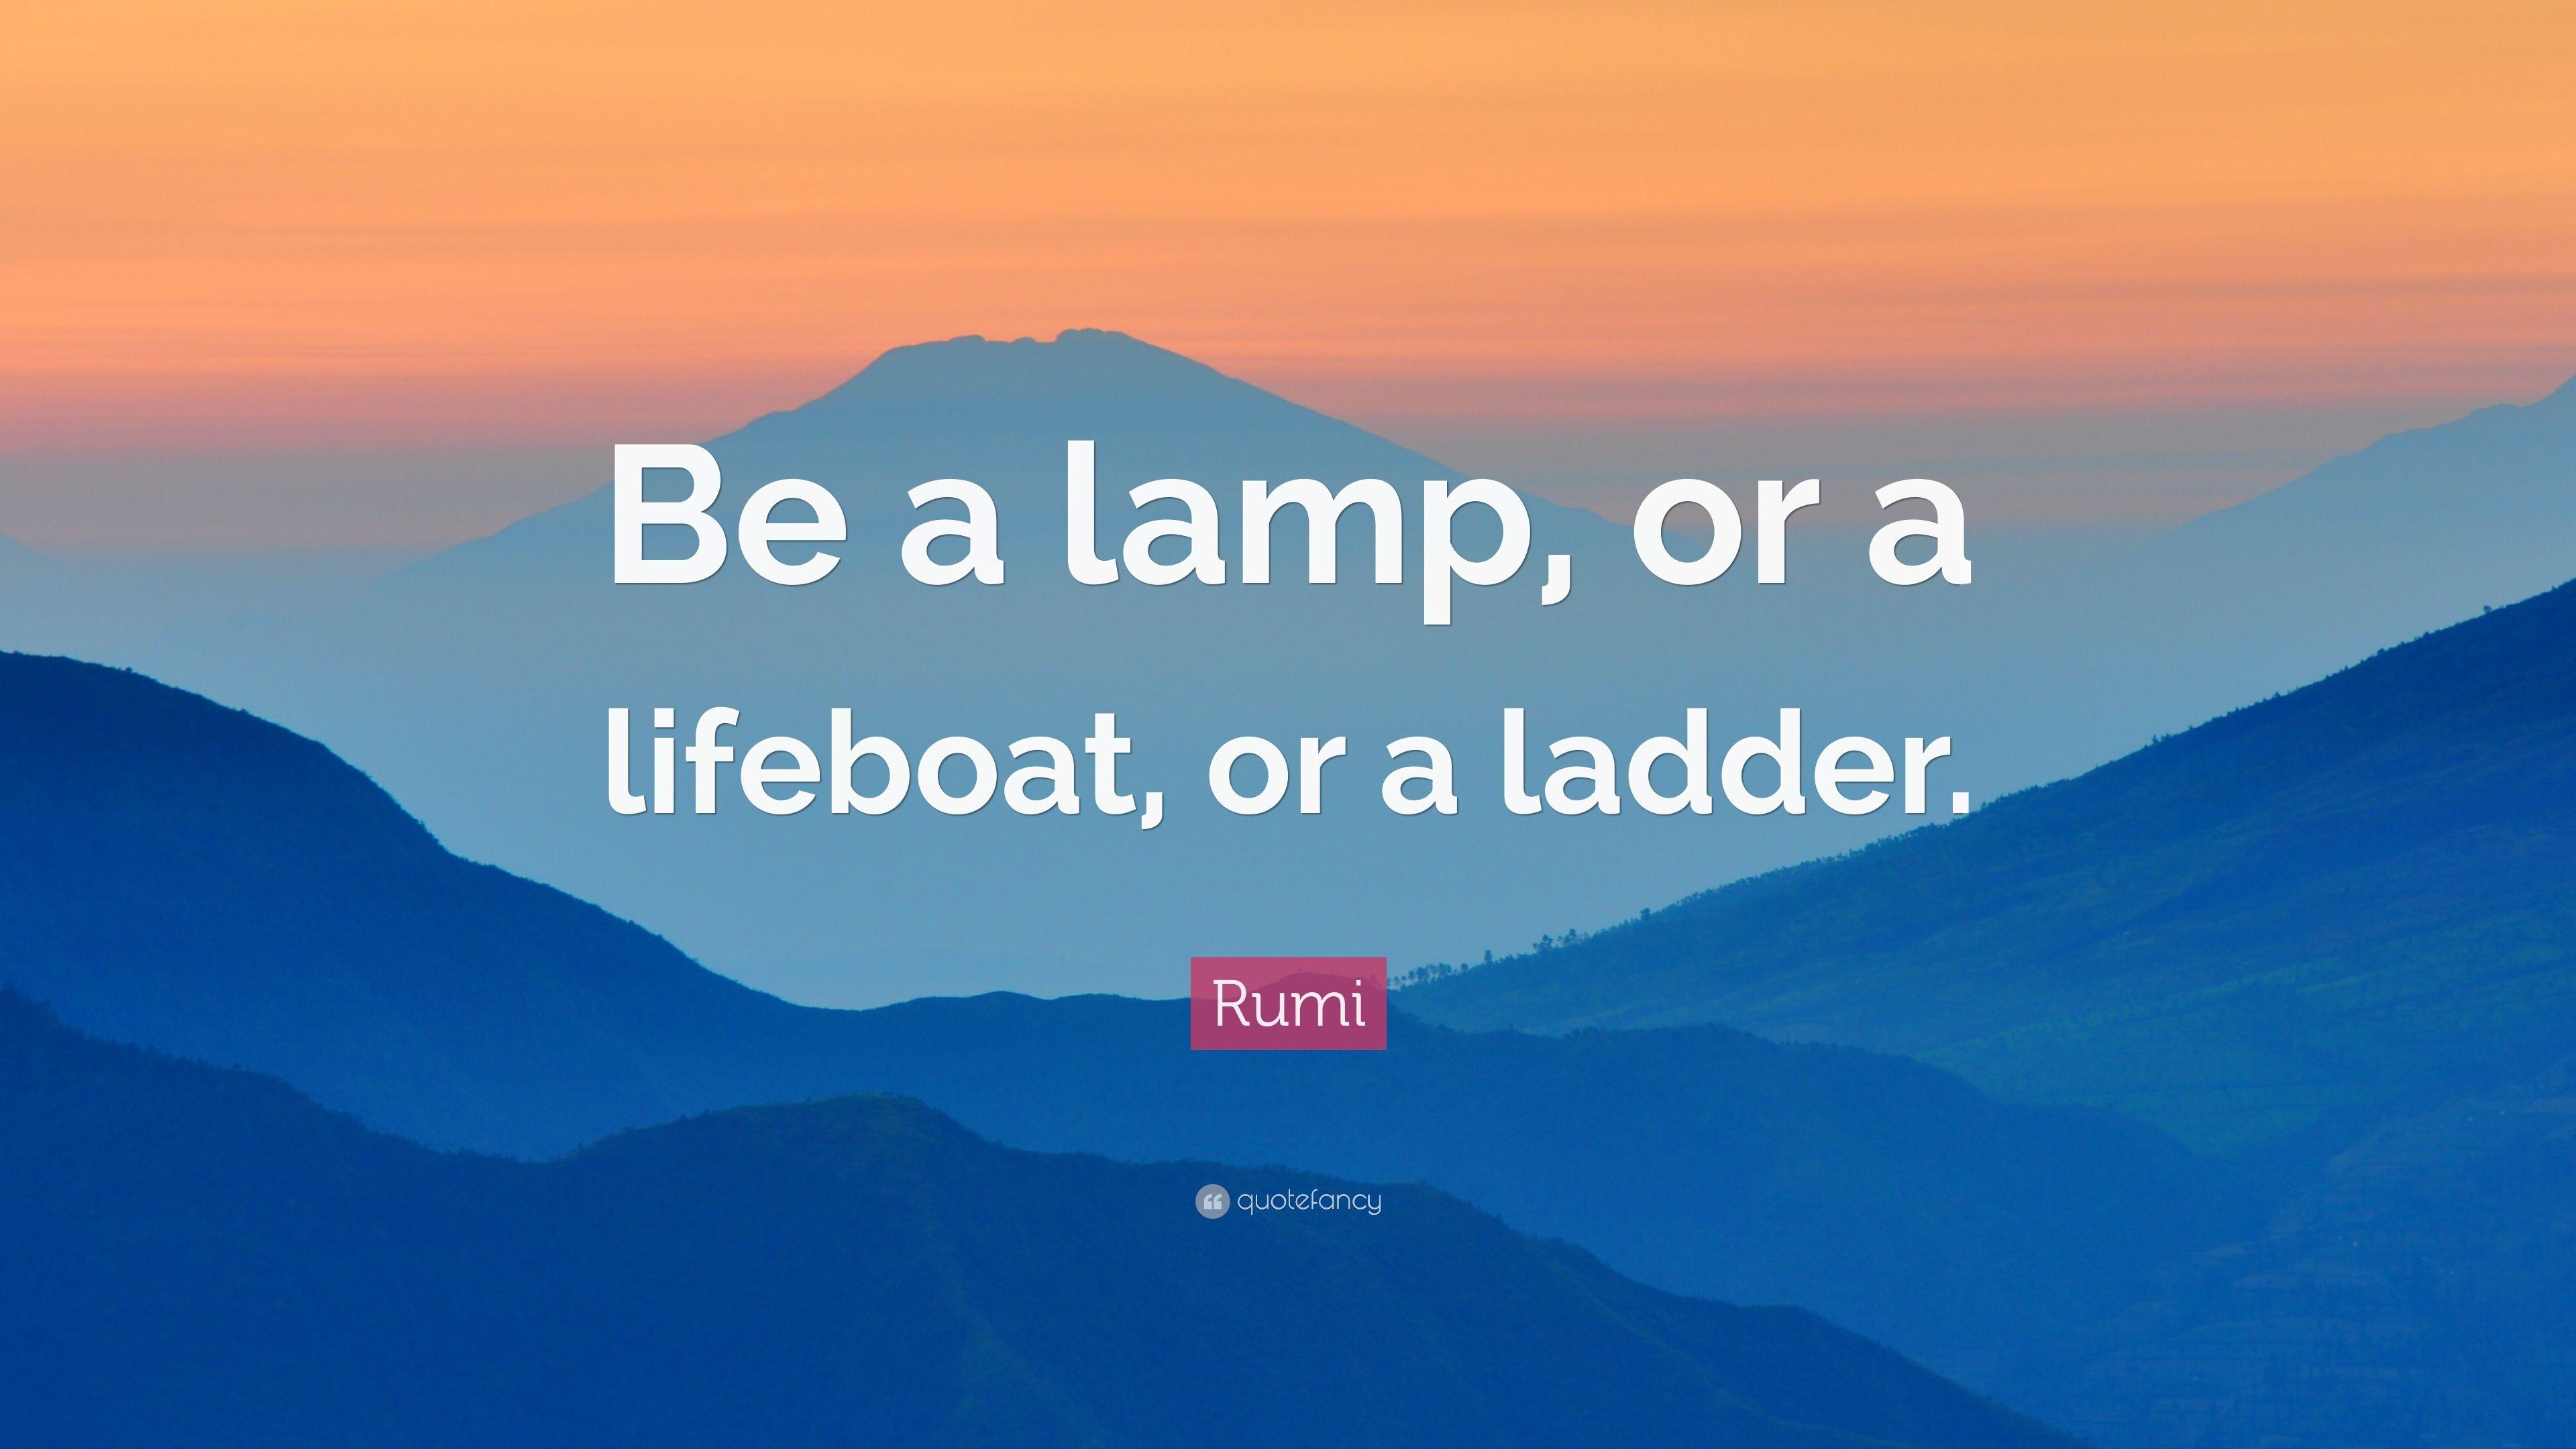 Rumi Quote: “Be a lamp, or a lifeboat, or a ladder.” 7 wallpaper